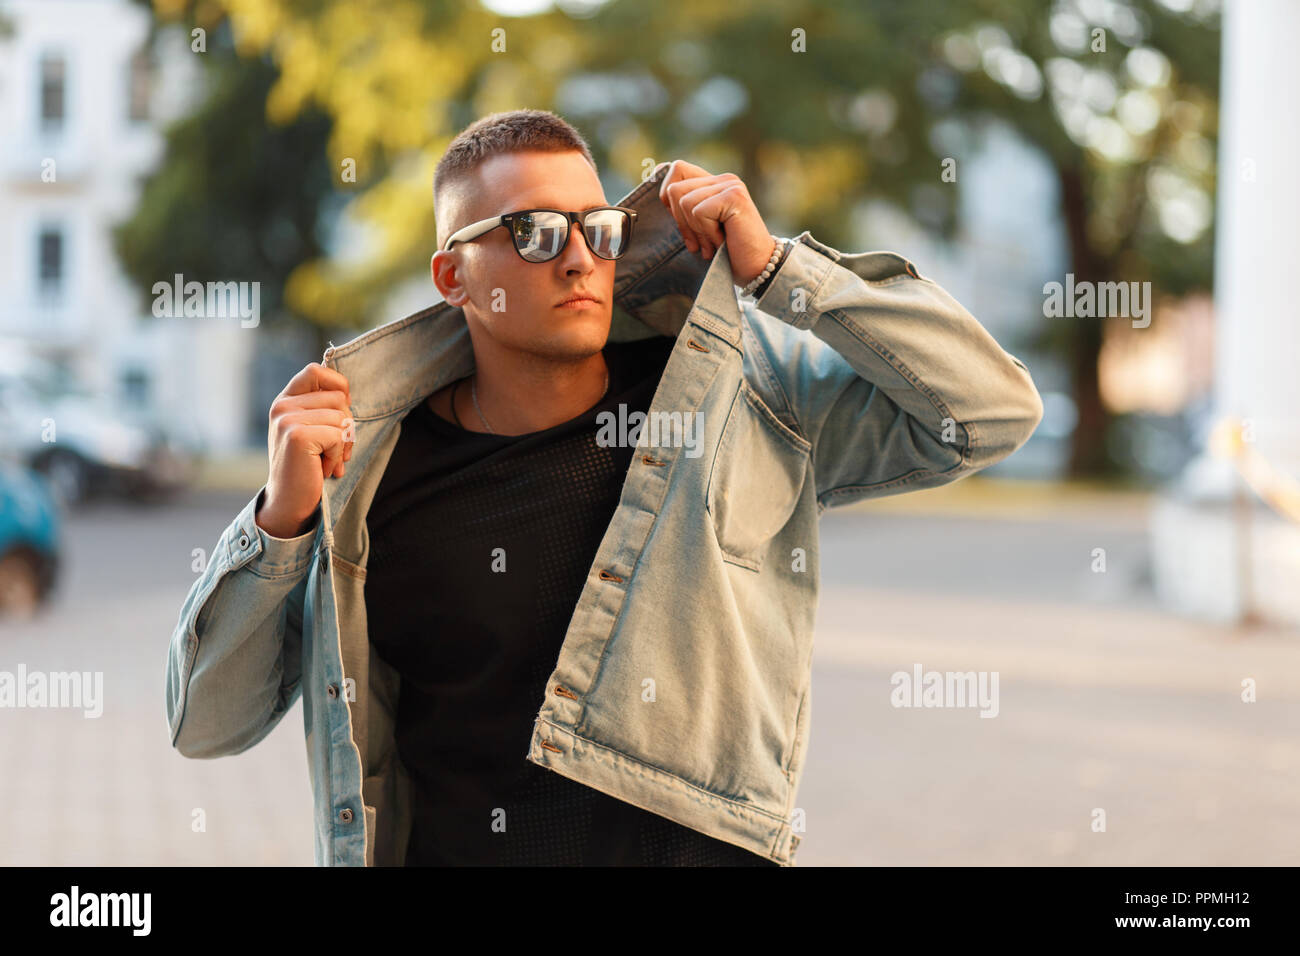 Fashionable handsome model man with a hairstyle in sunglasses and a denim jacket with a black T-shirt posing on the street Stock Photo